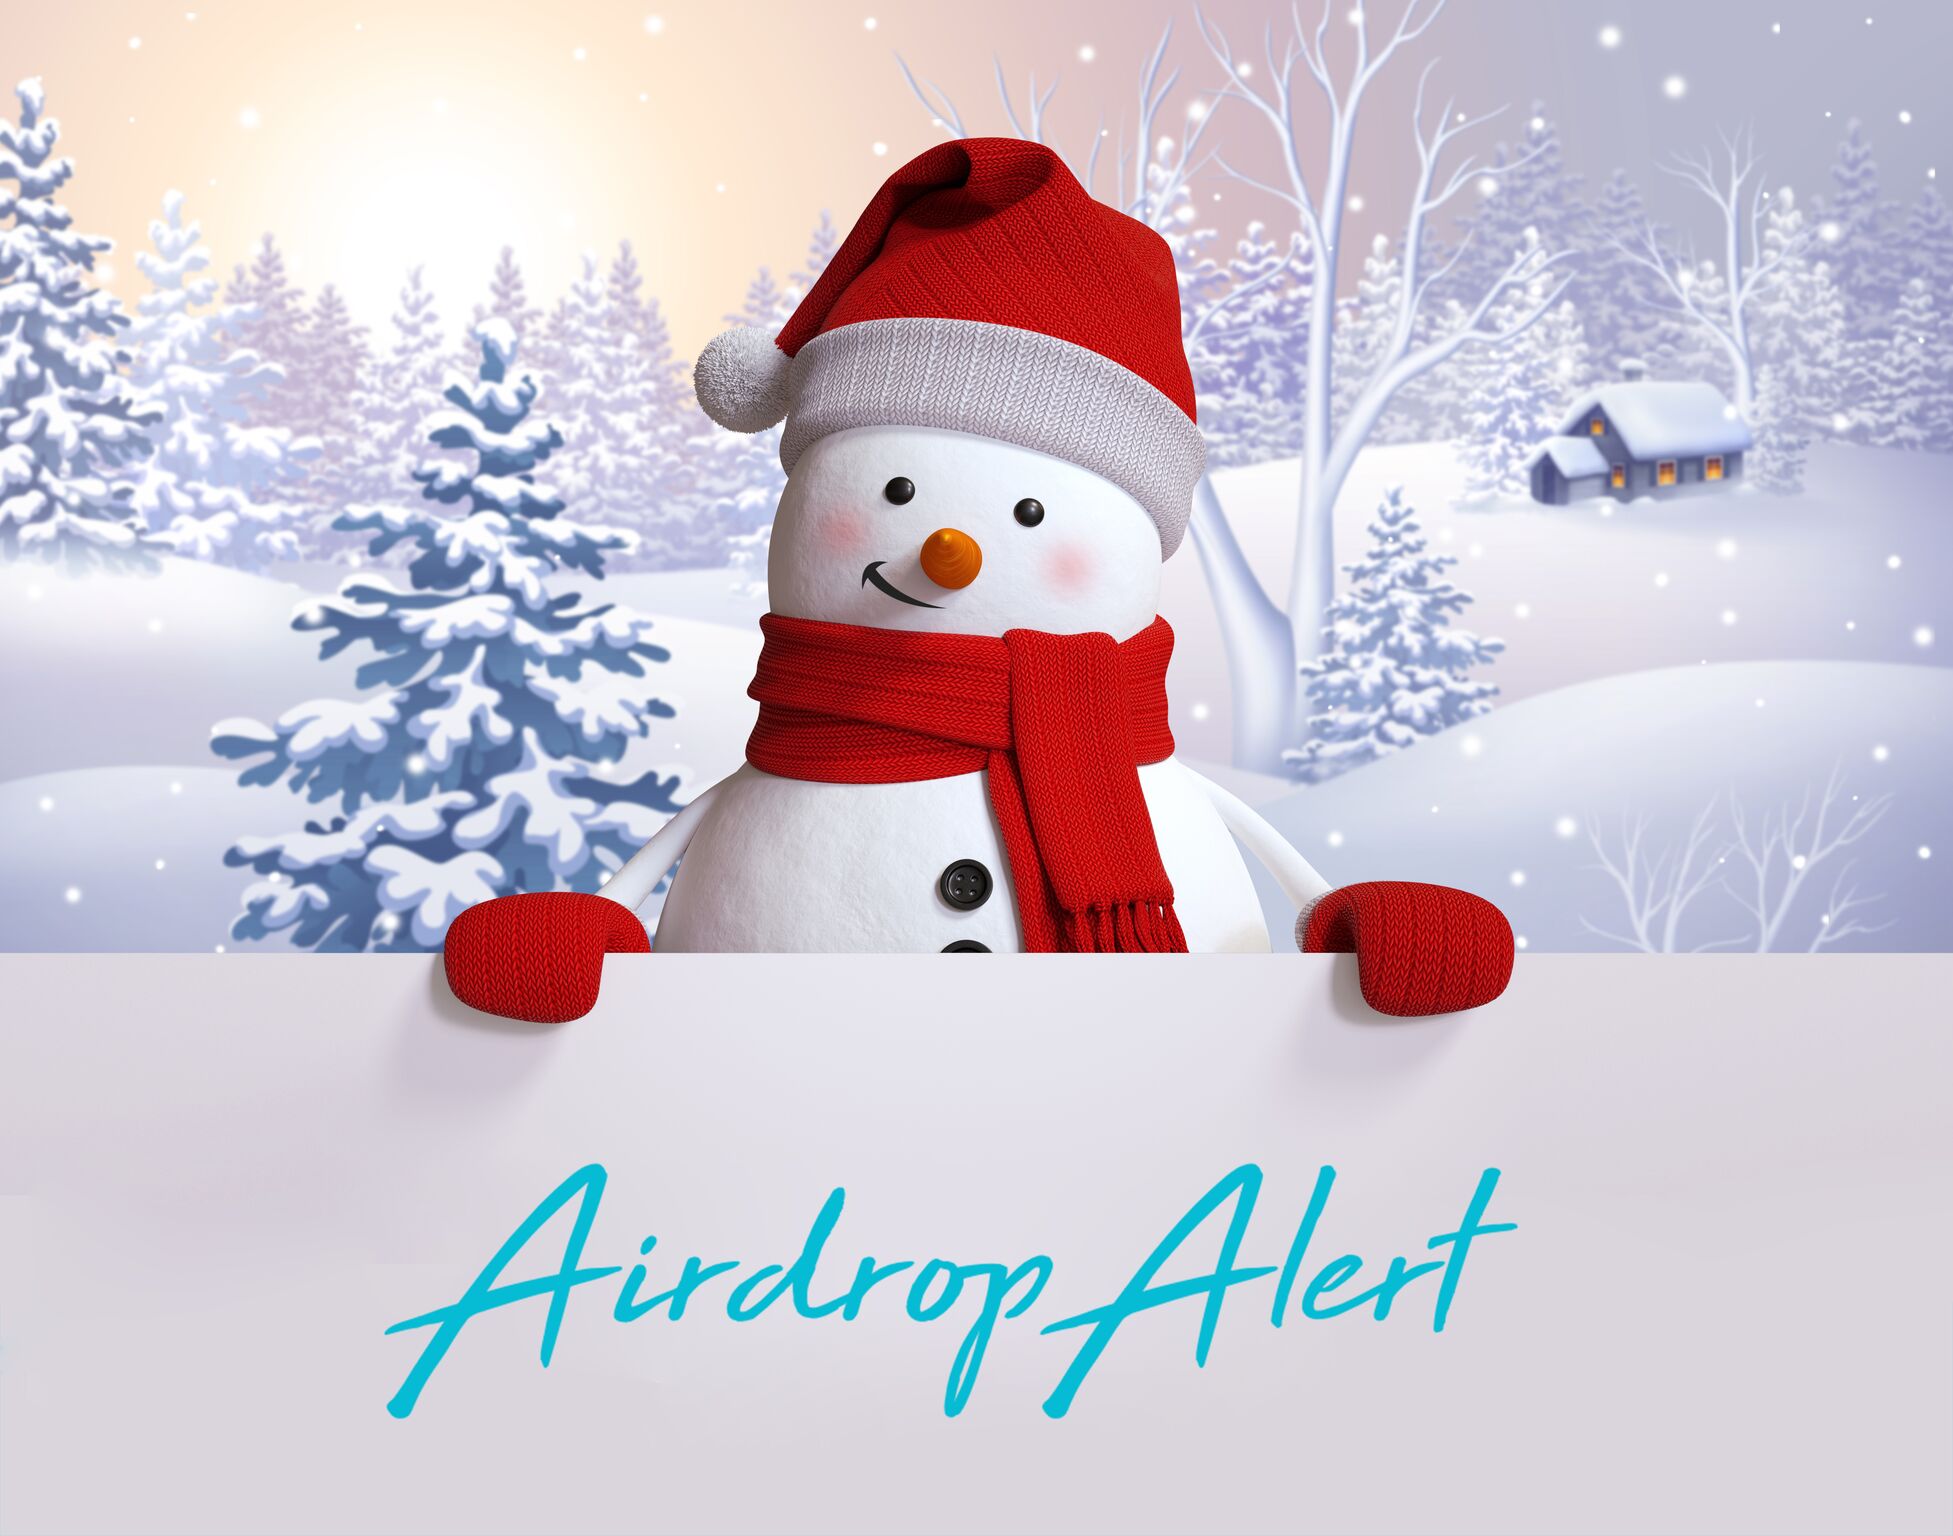 Is airdrop winter coming to an end? - AirdropAlert